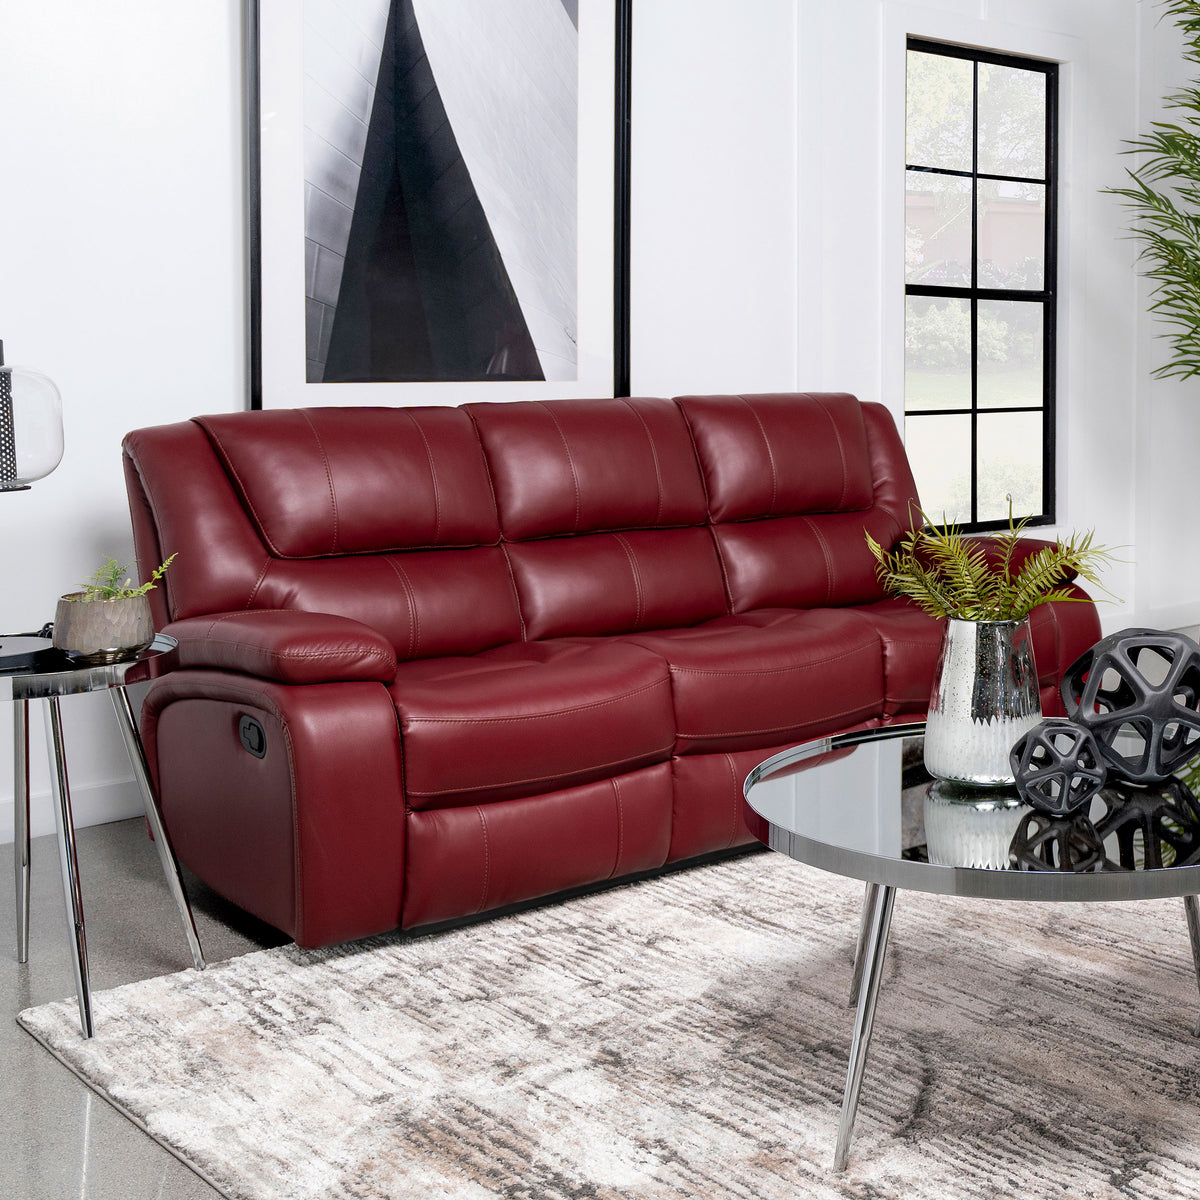 Camila Upholstered Motion Reclining Sofa Red Faux Leather  Half Price Furniture